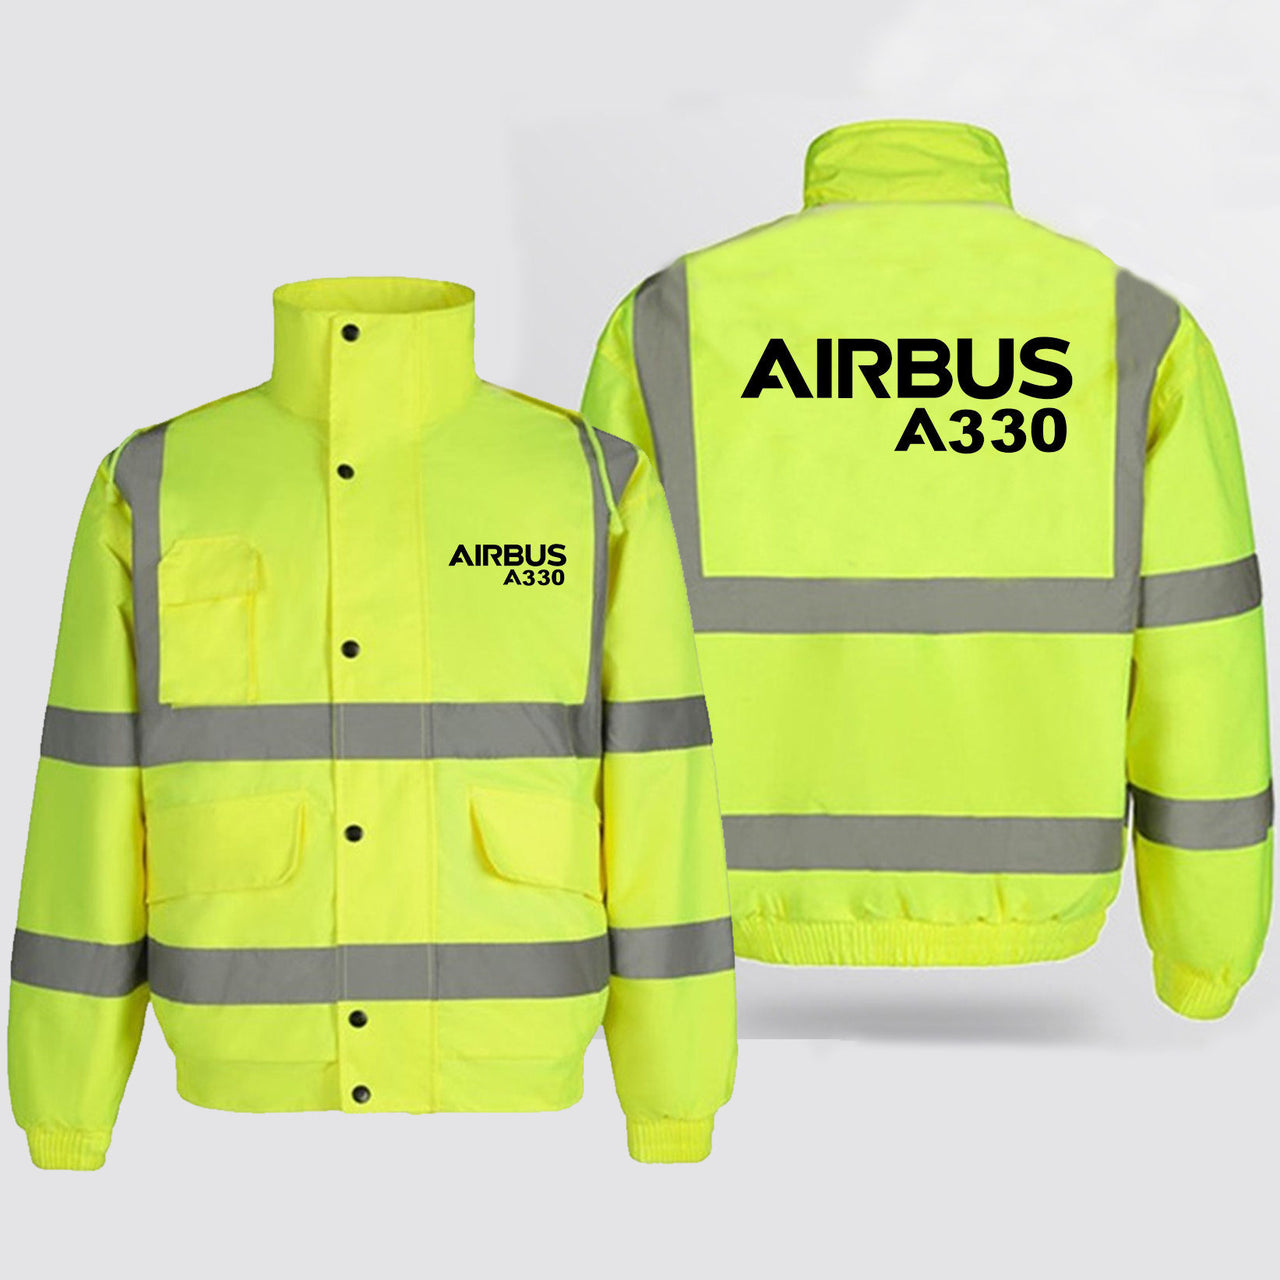 Airbus A330 & Text Designed Reflective Winter Jackets